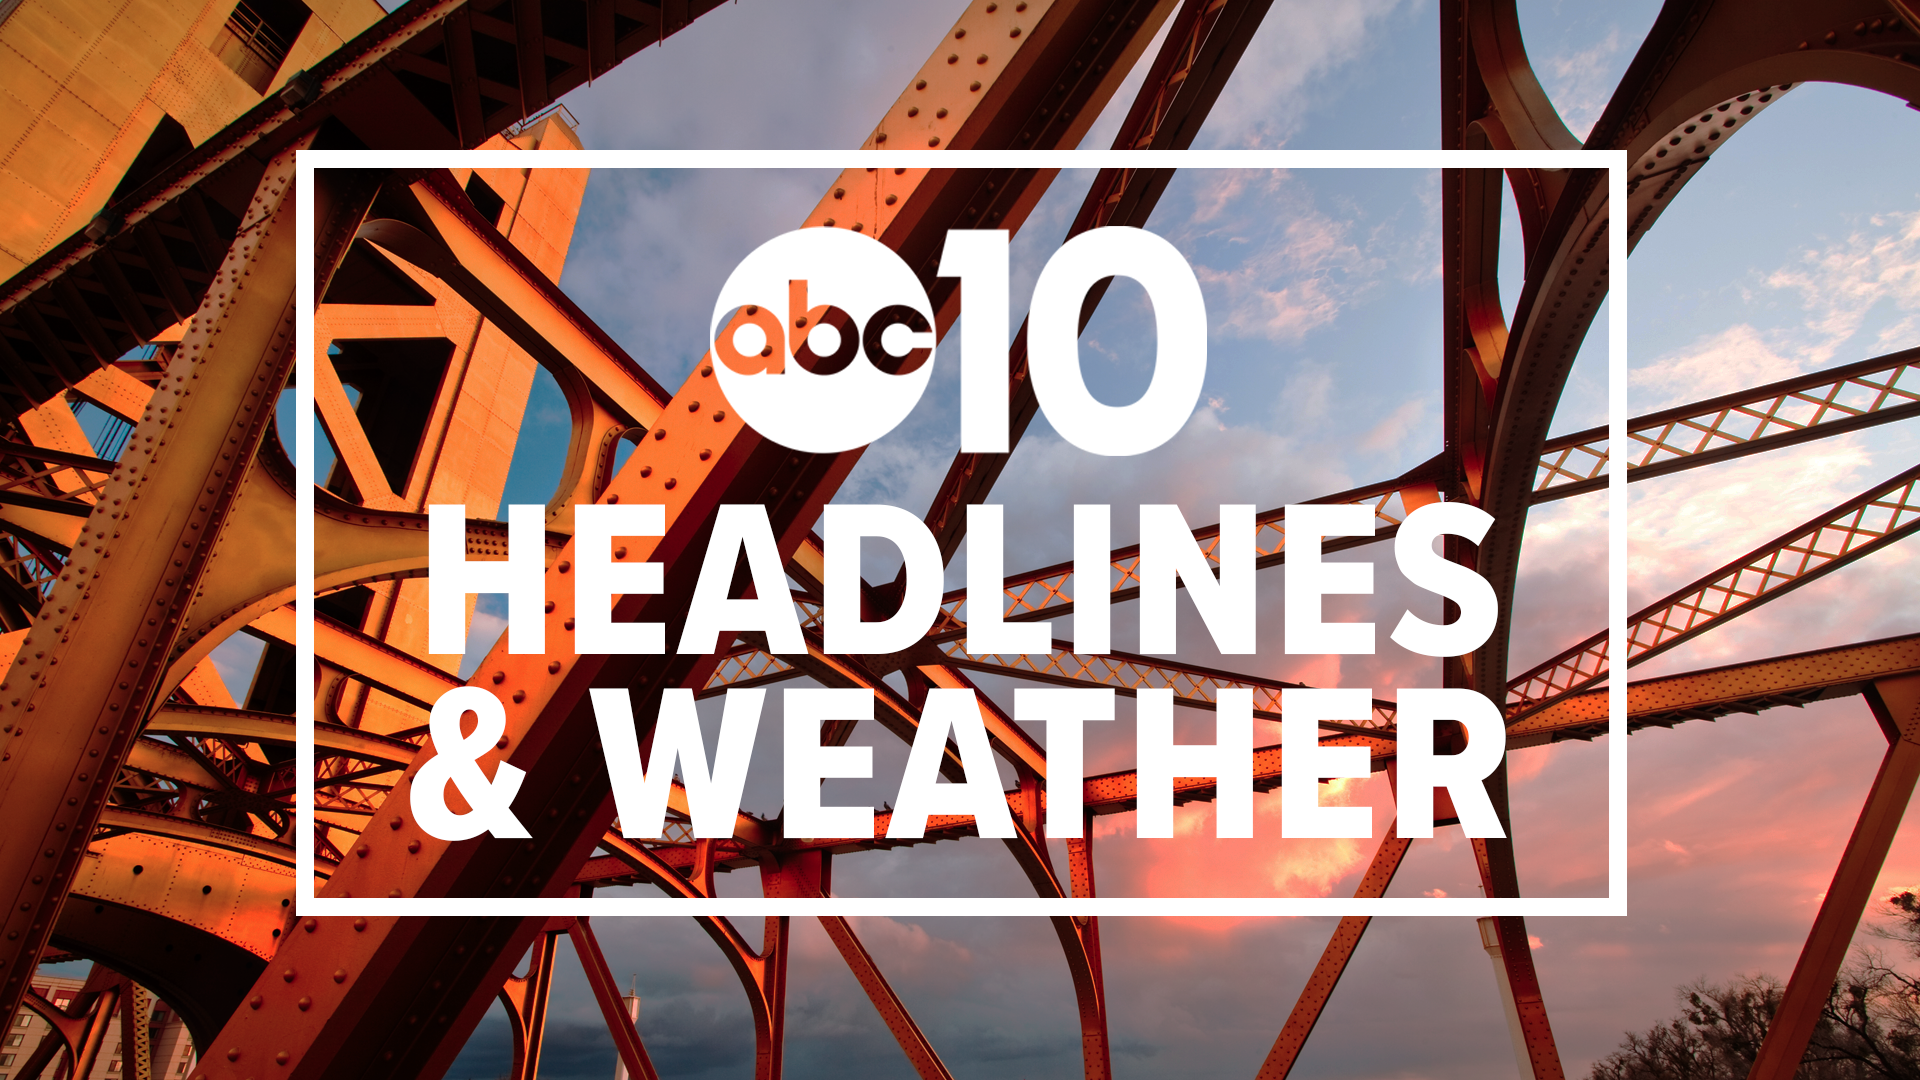 Evening Headlines: March 15, 2020 | Catch in-depth reporting on #LateNewsTonight at 11 p.m. | The latest Sacramento news is always at www.abc10.com